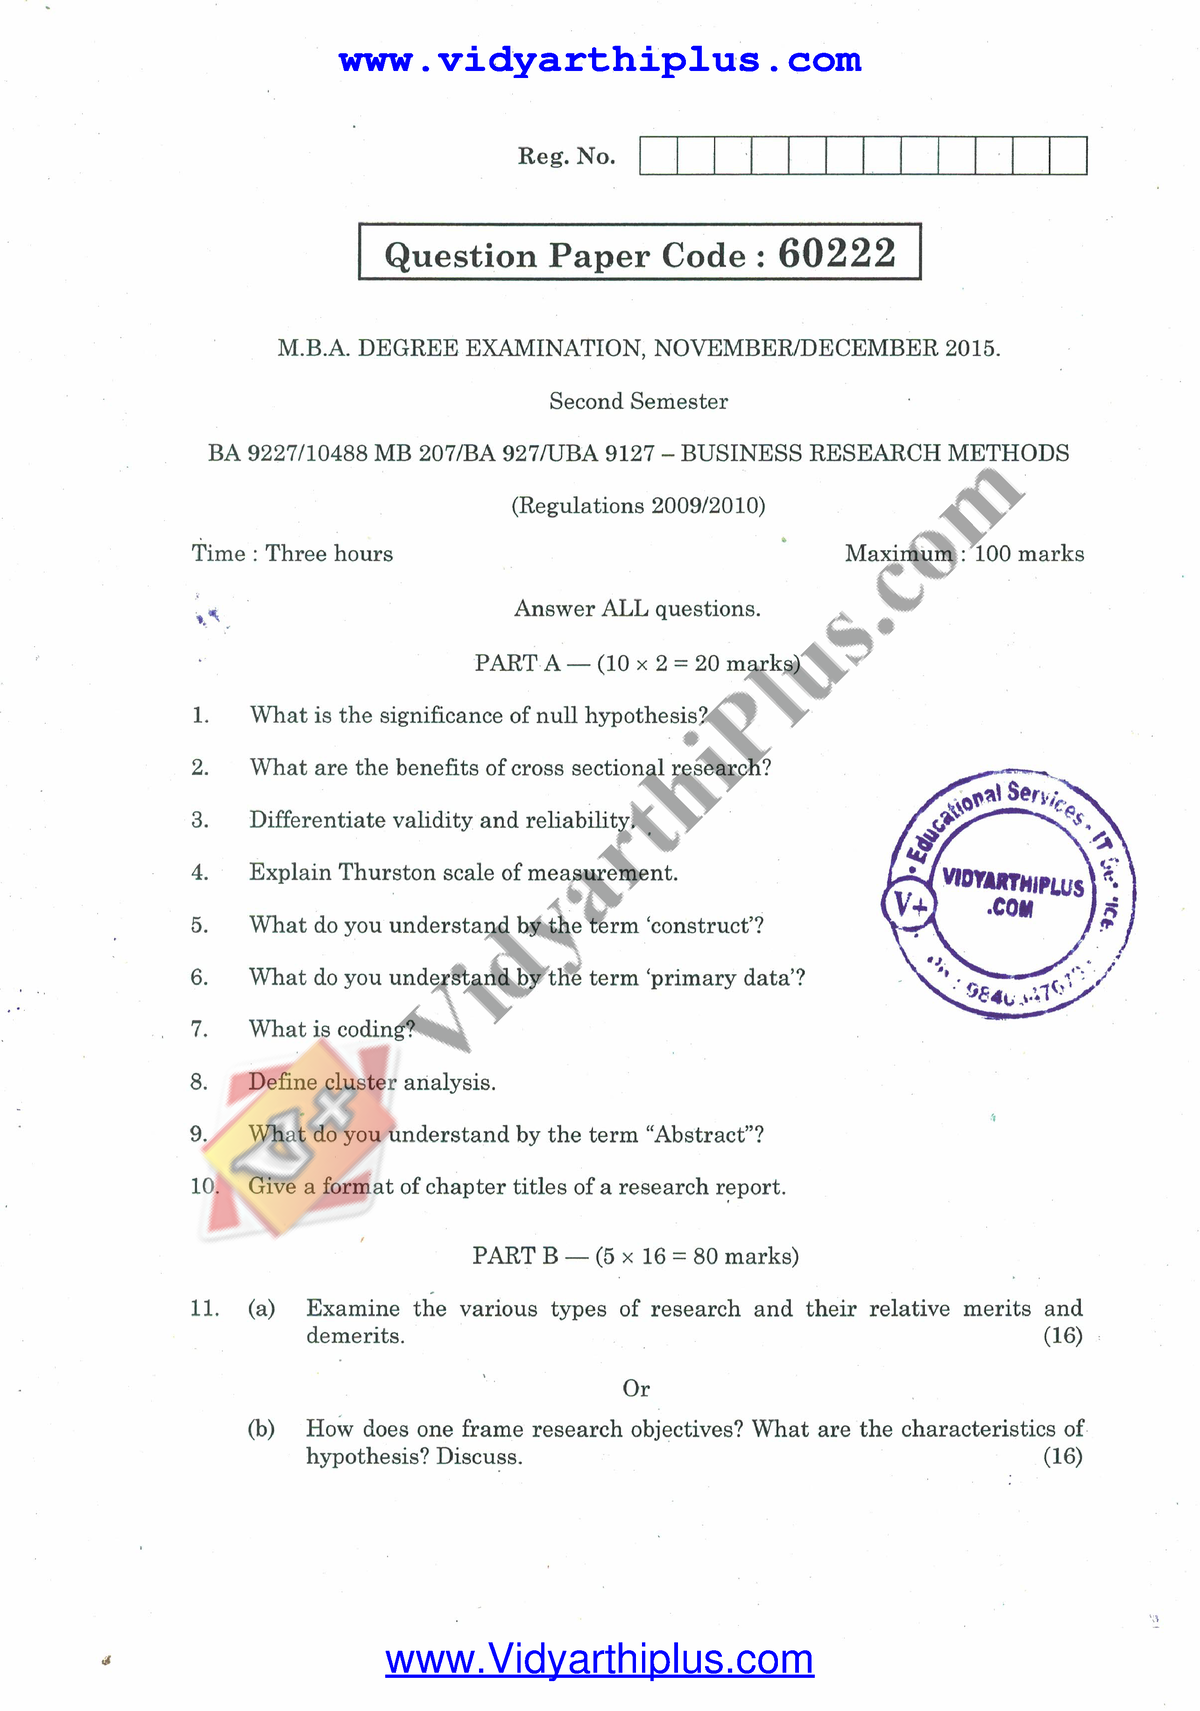 business research methods previous year question paper